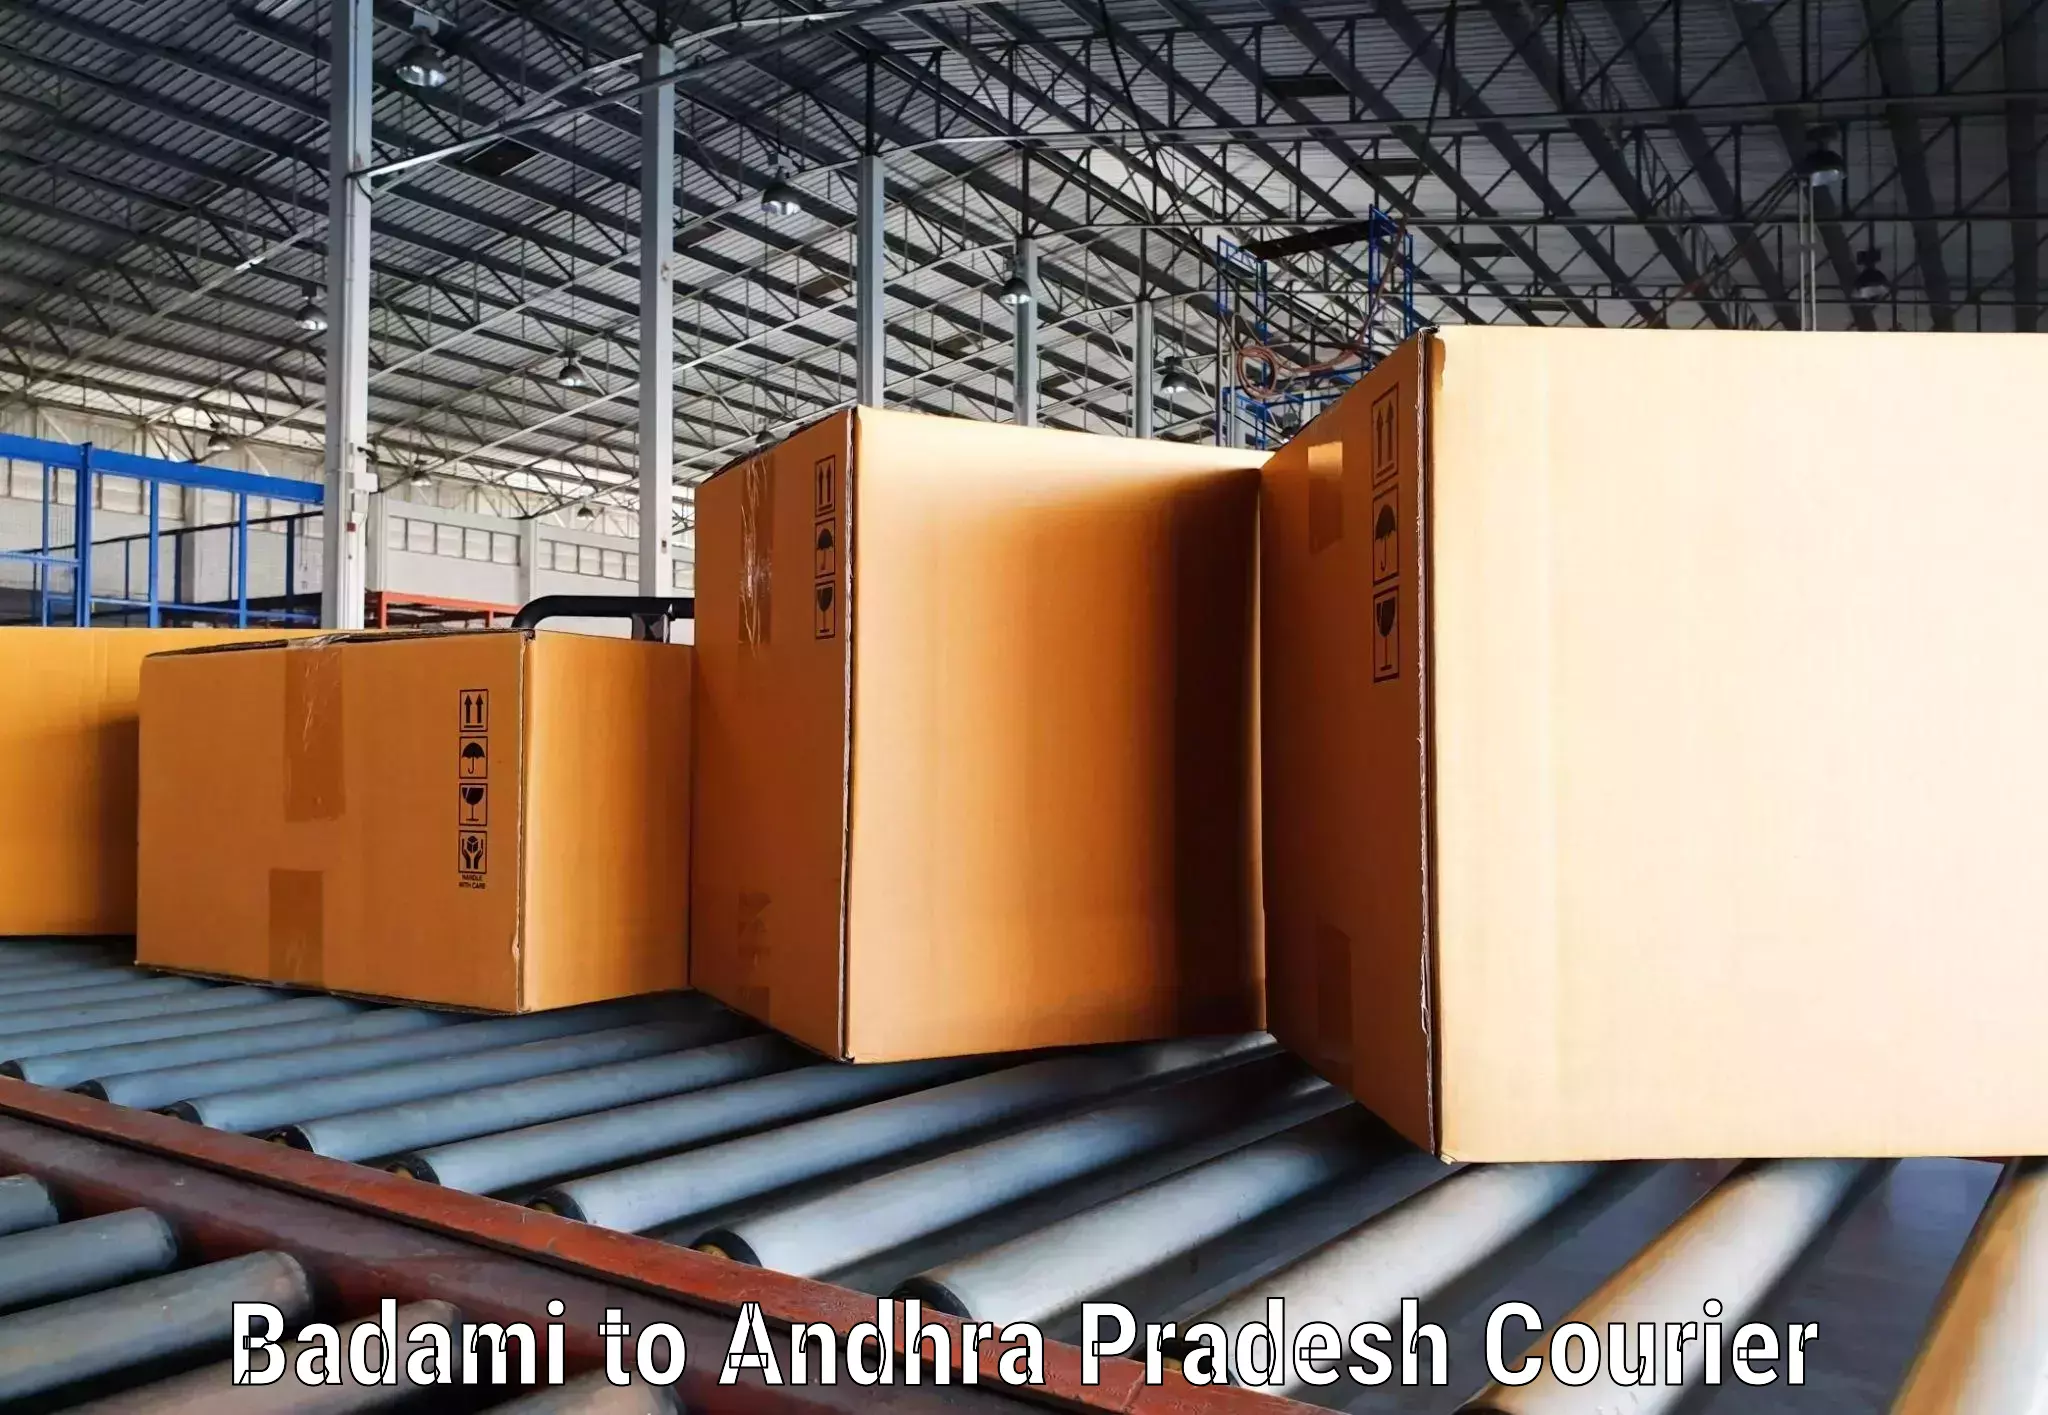 State-of-the-art courier technology Badami to Parvathipuram